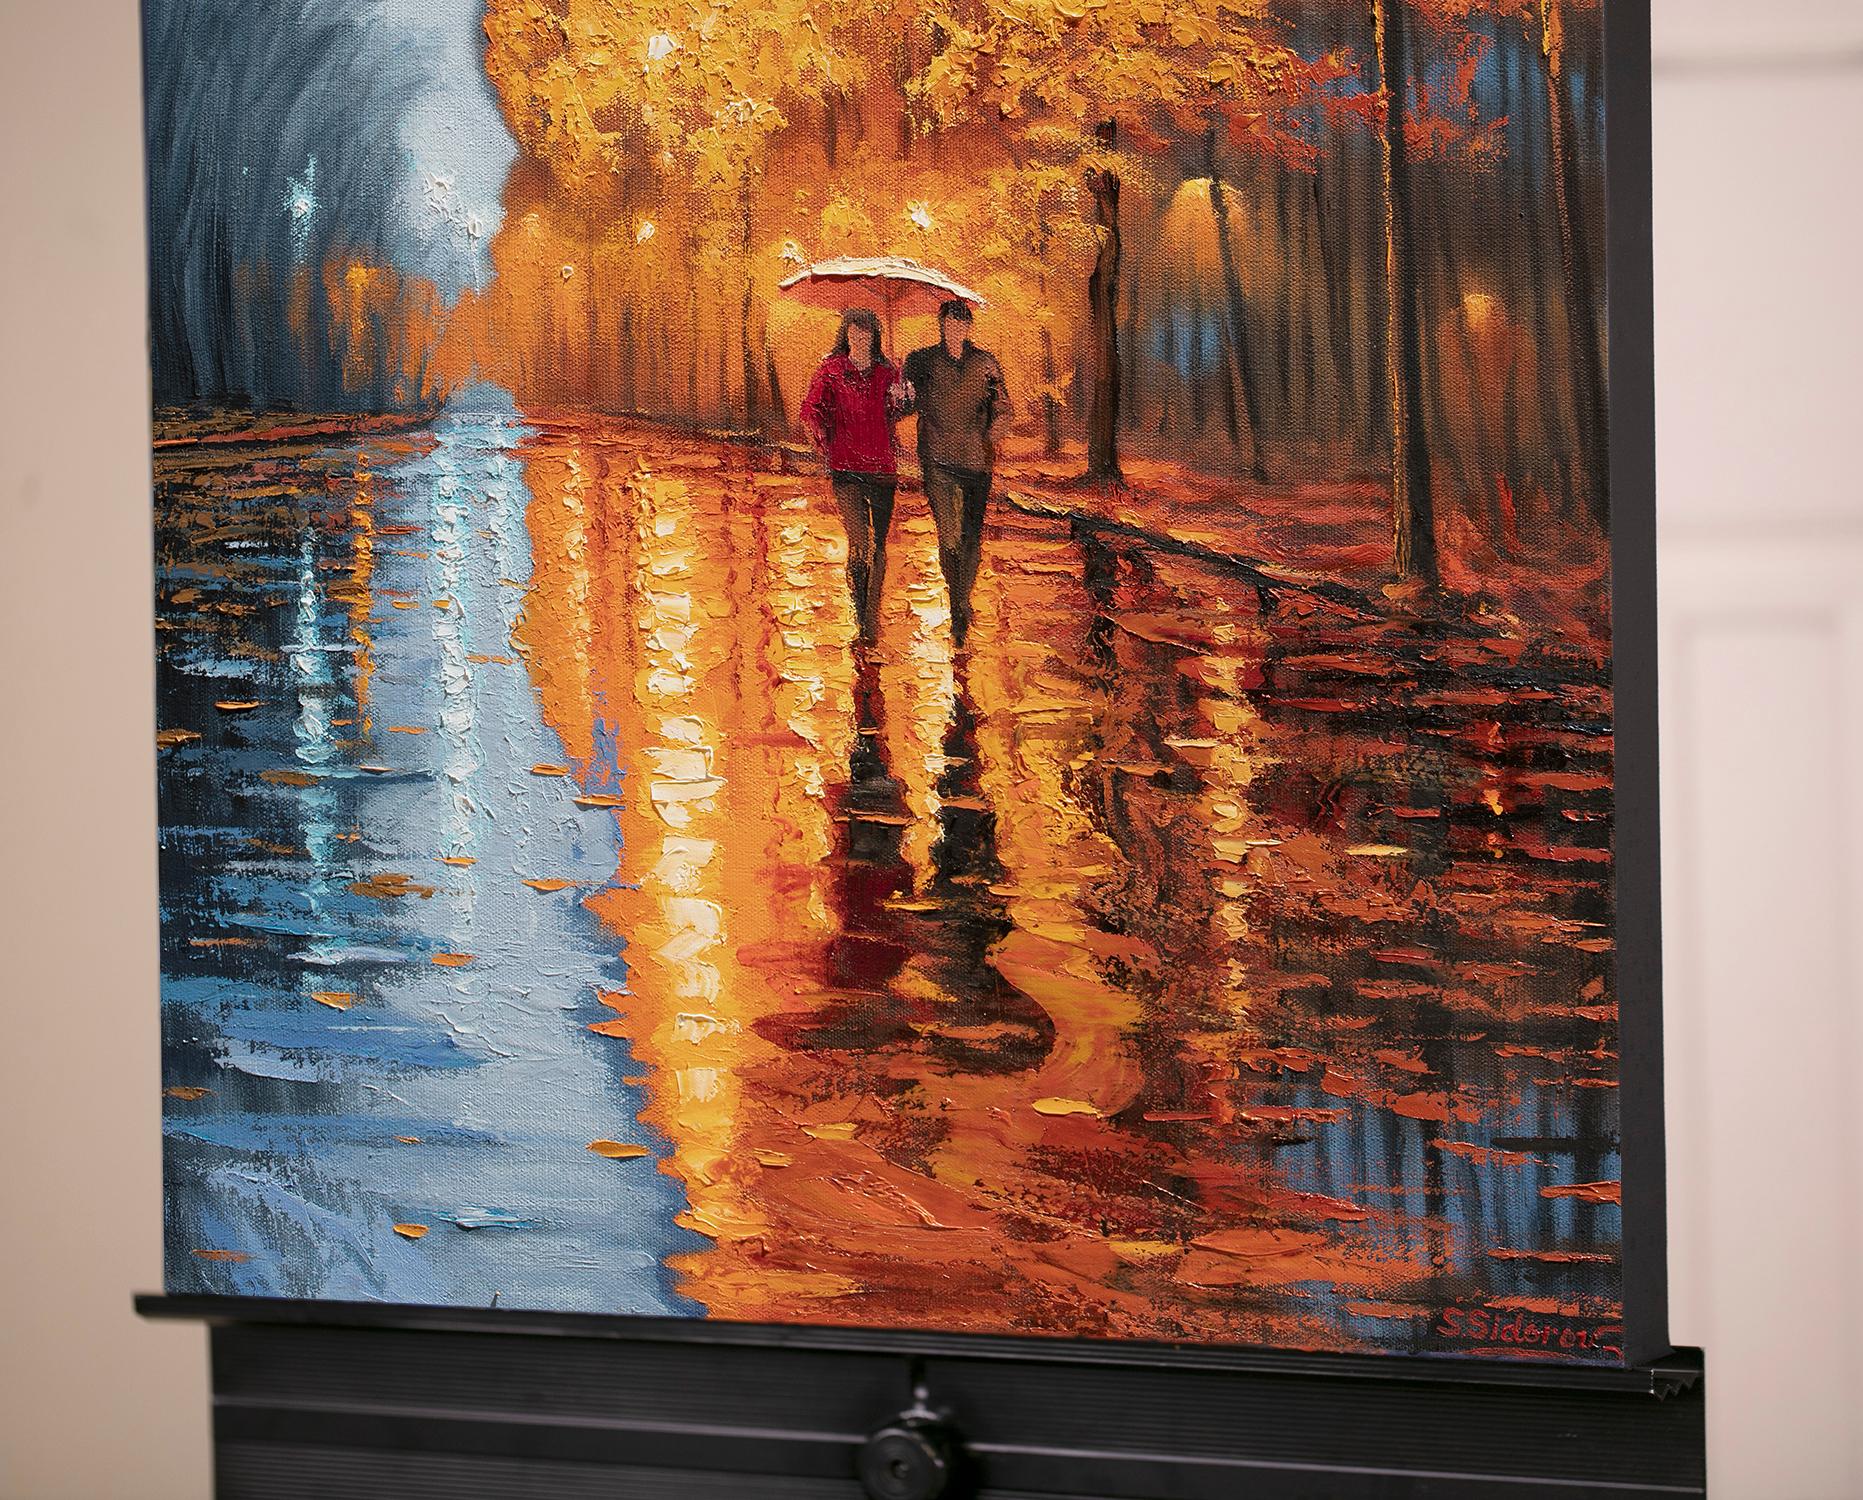 <p>Artist Comments<br>Vibrant hues dance with light and shadow, capturing an intimate stroll of a couple sharing an umbrella beneath autumn's golden canopy. Blending expressionism and impressionism, the artwork captures the fleeting beauty of shared